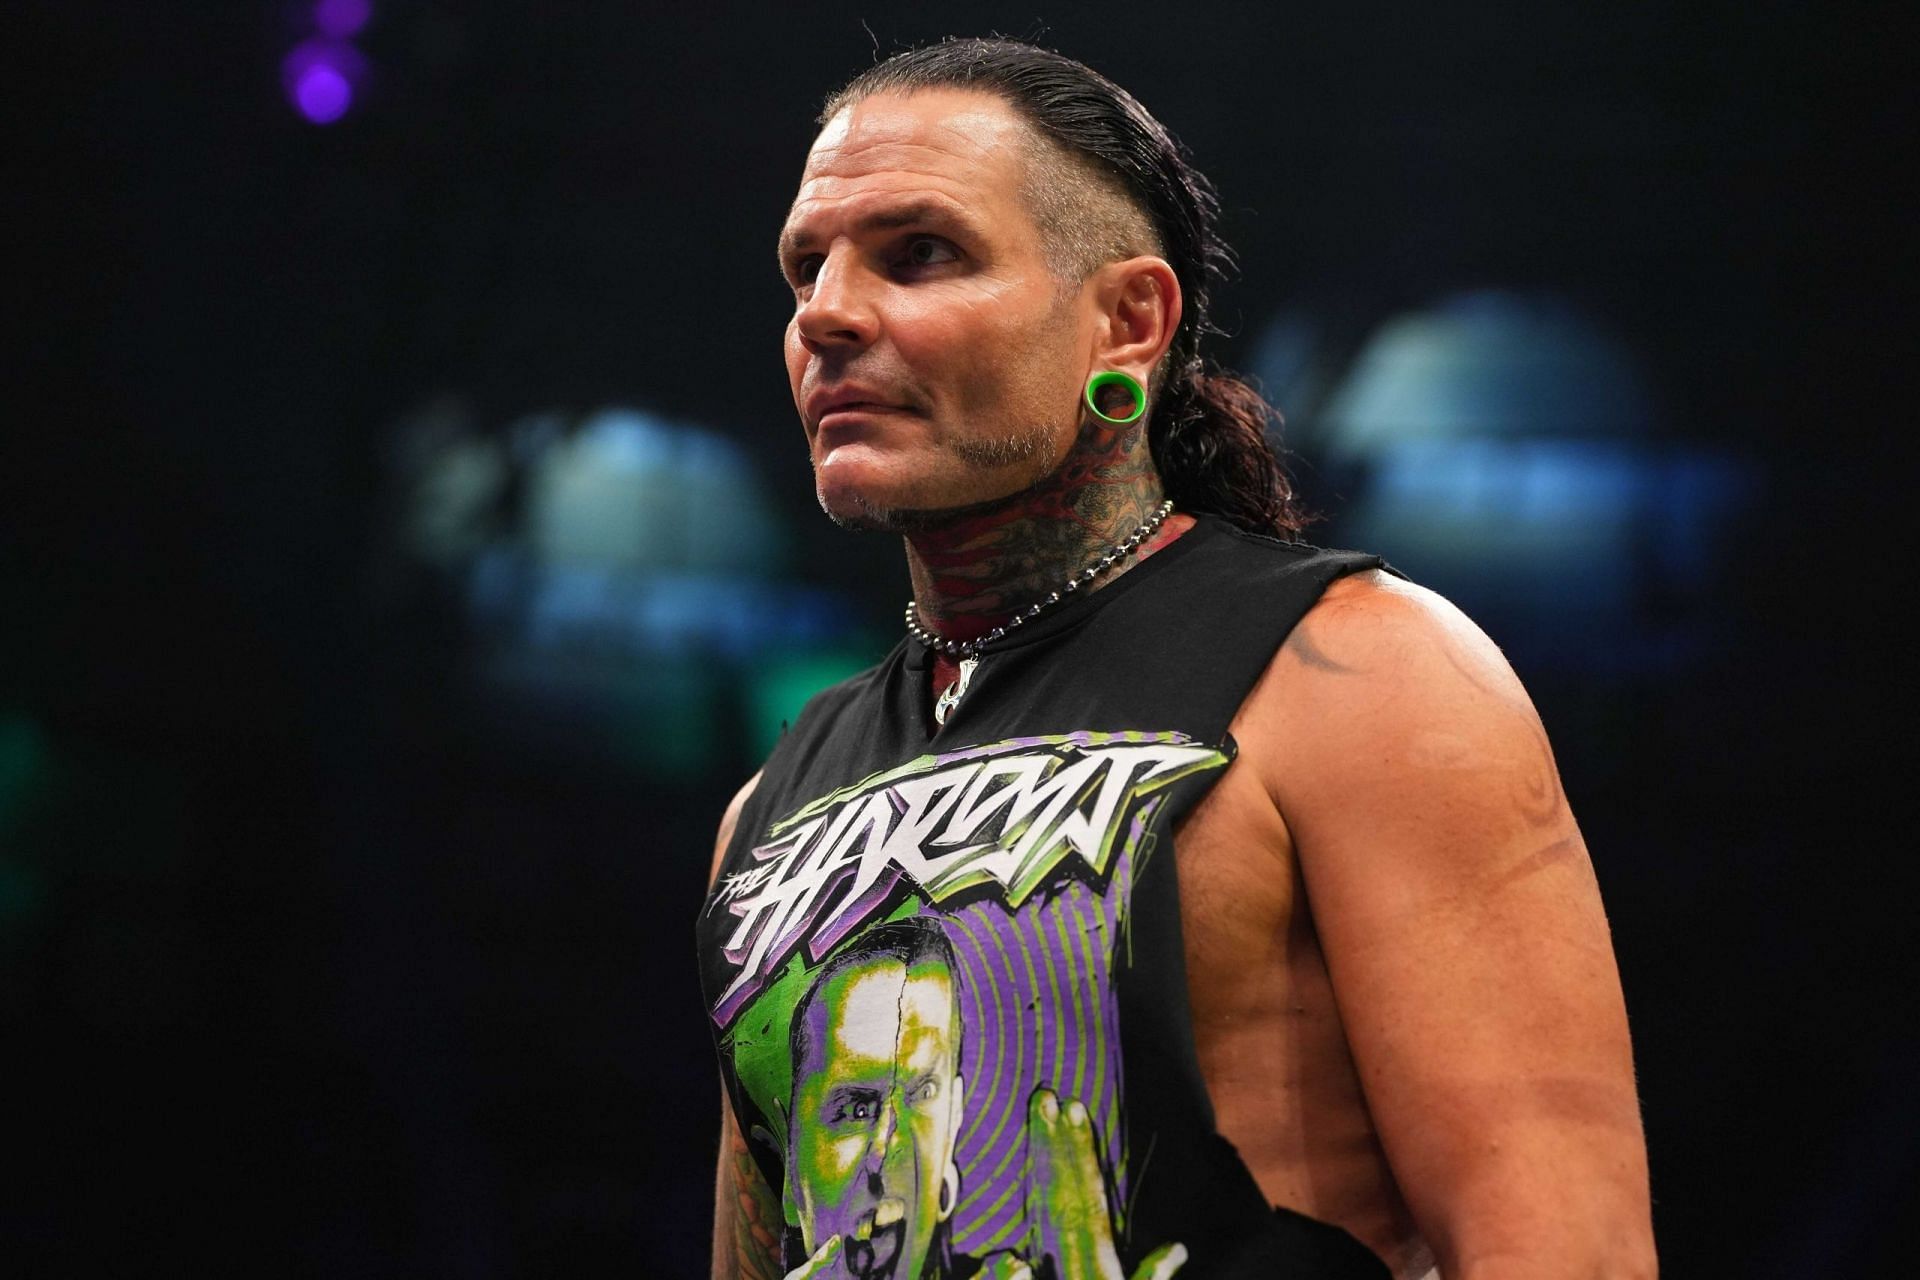 Jeff Hardy vs. CM Punk would be an instant classic